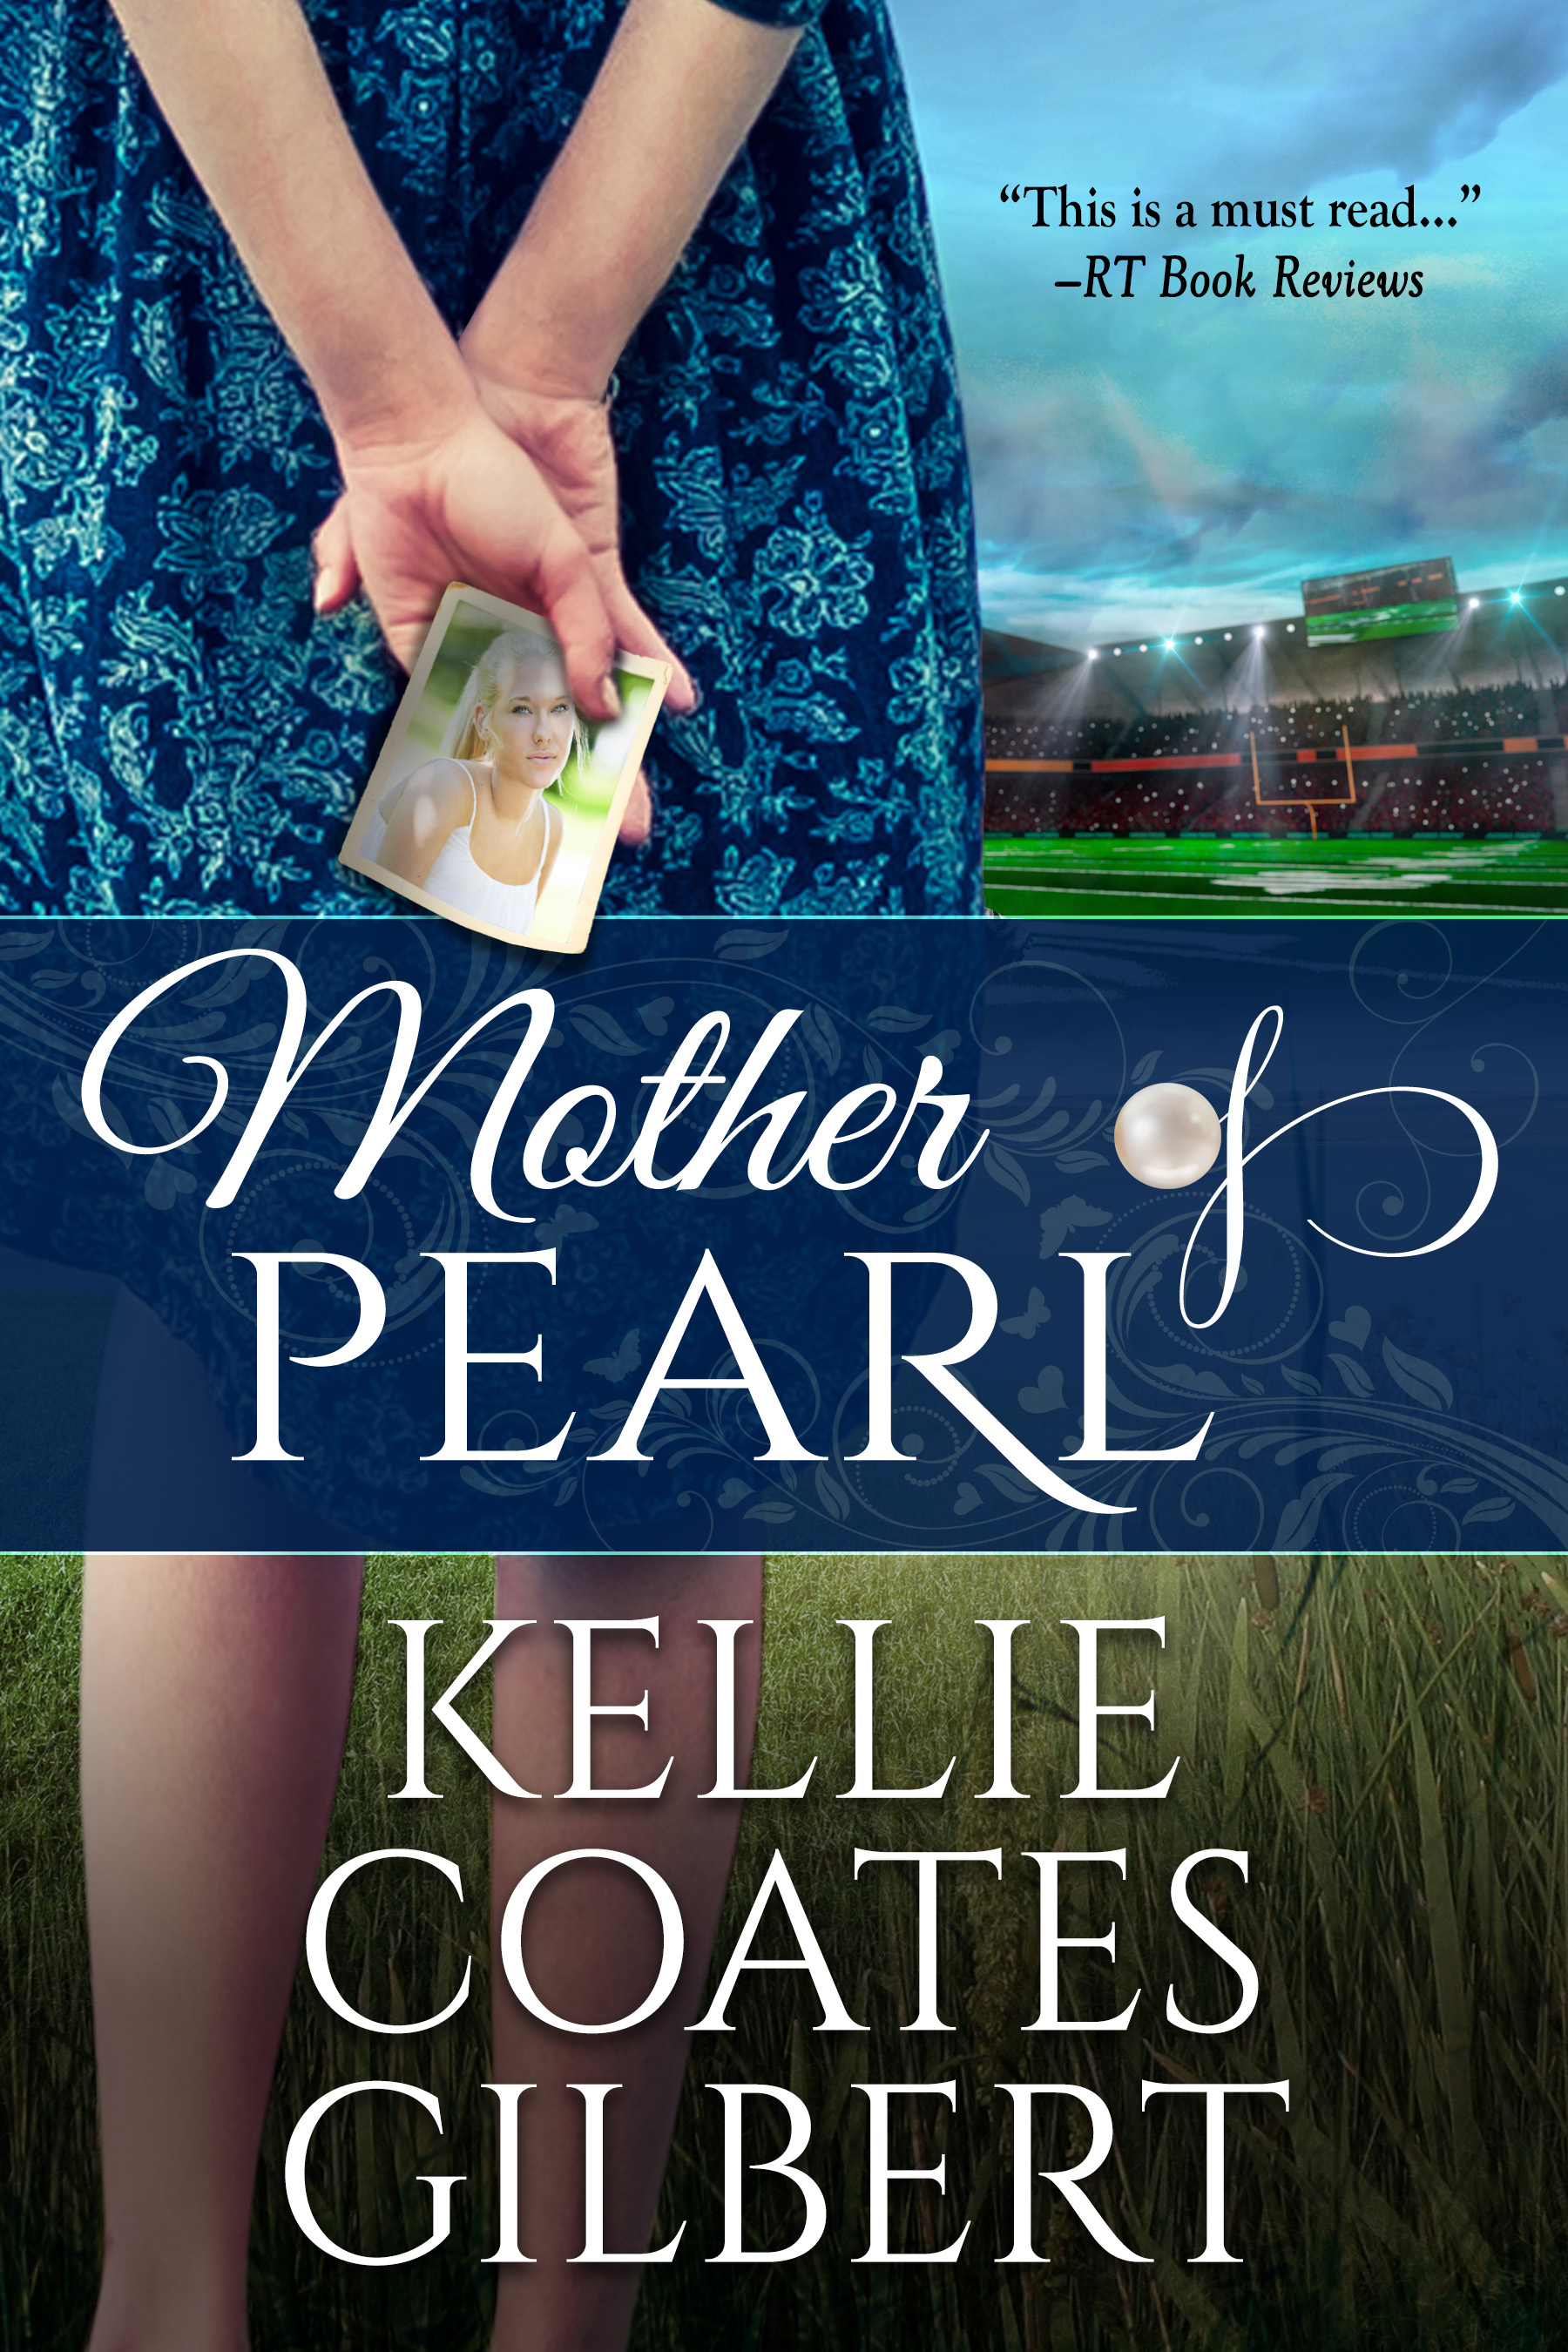 Mother of Pearl by Kellie Coates Gilbert